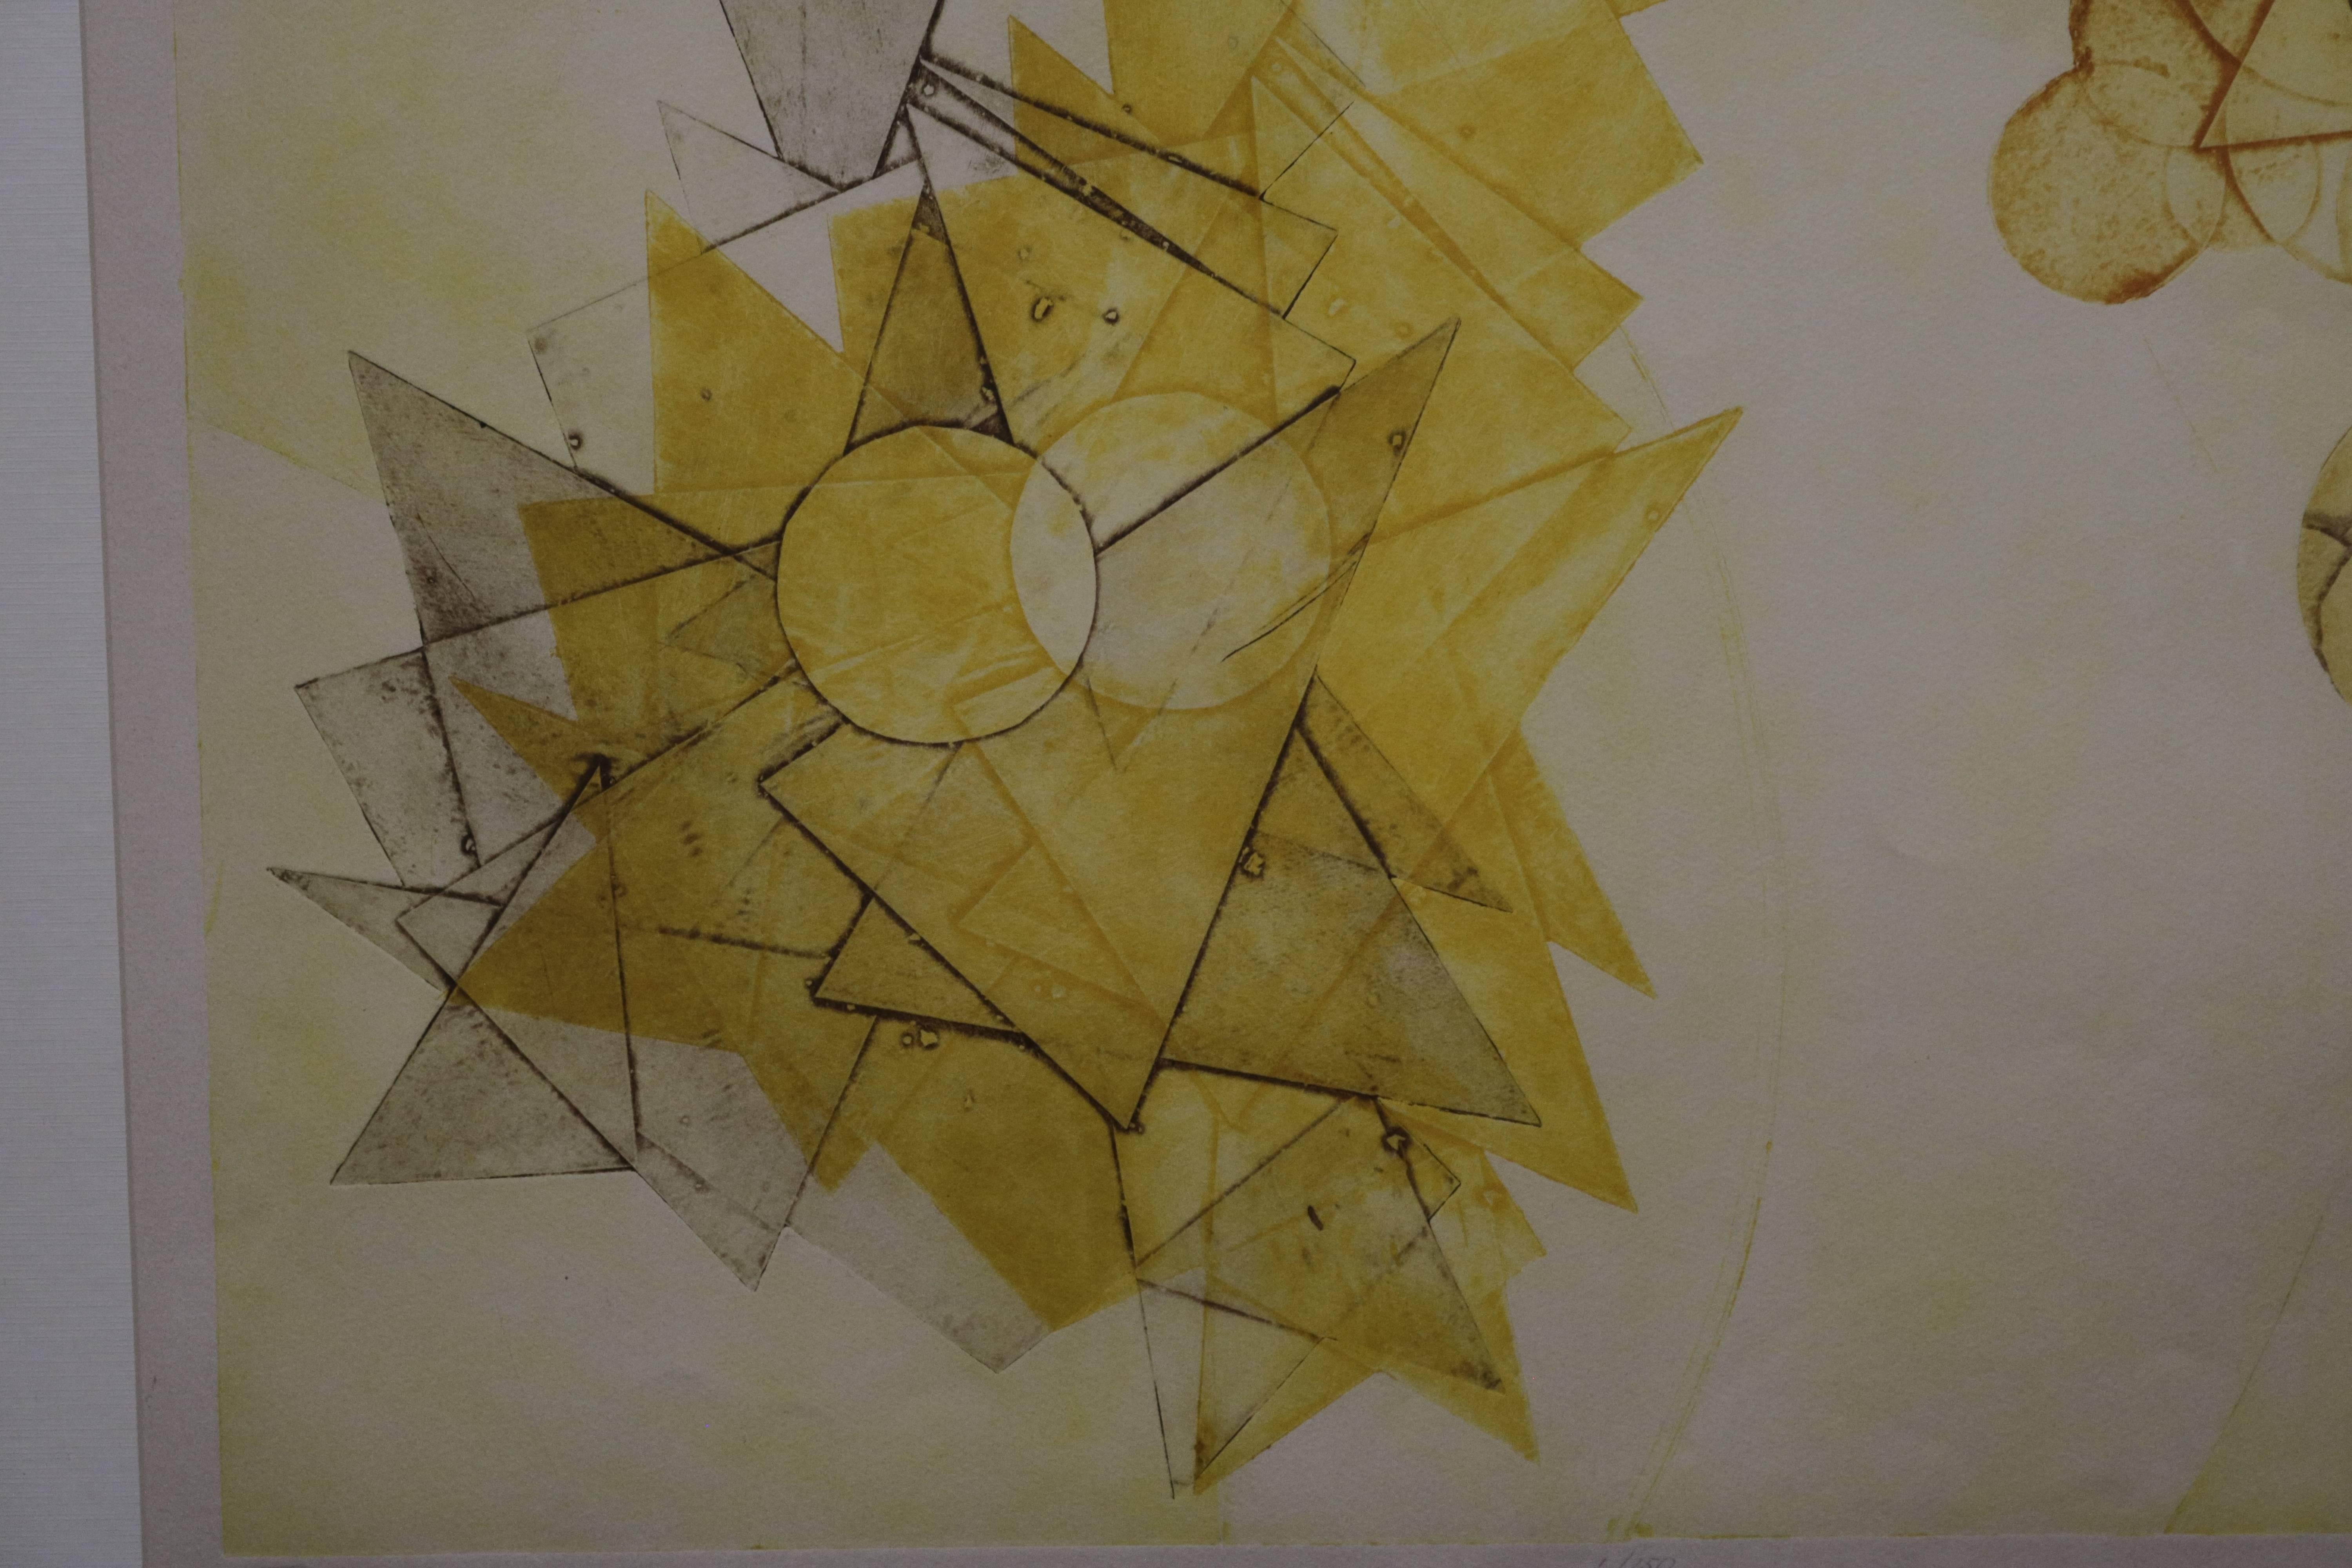 Framed lithograph of geometric forms in yellow and brown. Numbered 1/150 and signed by the artist.